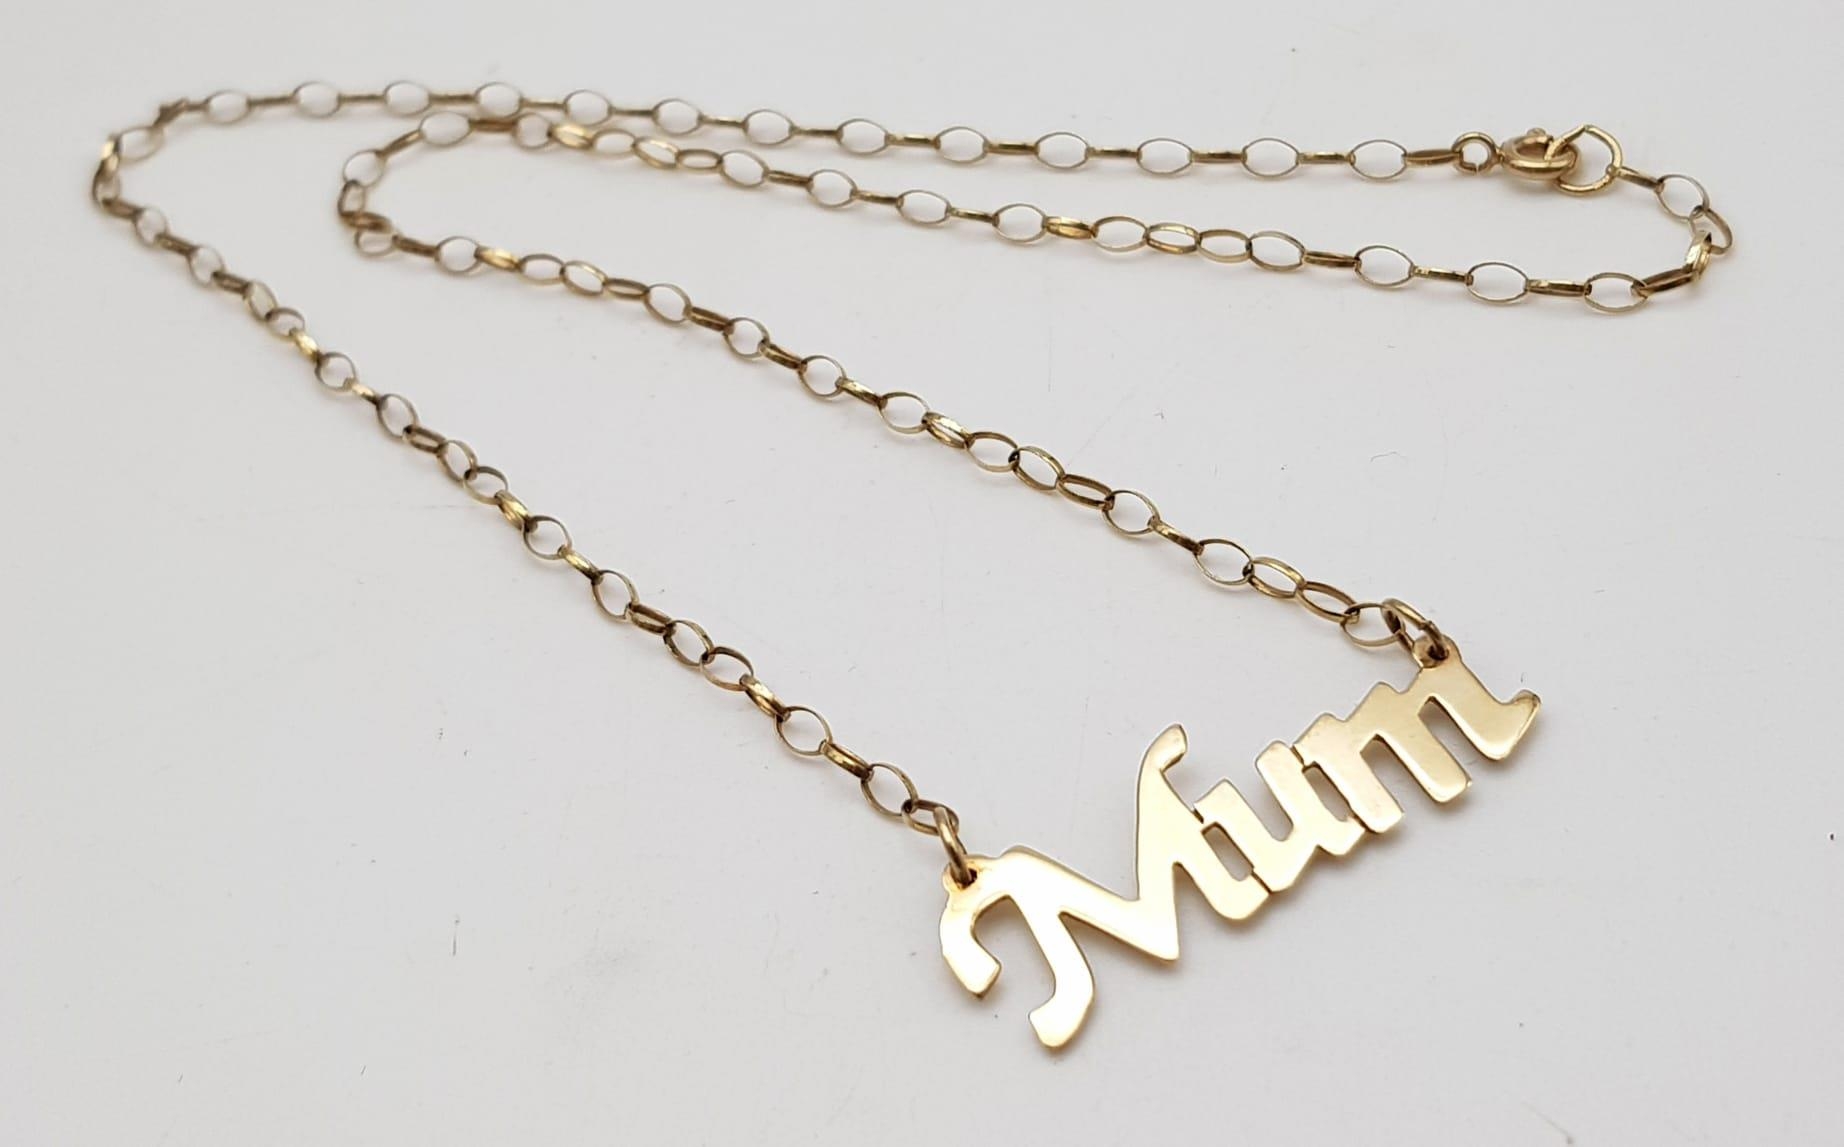 A 9 K yellow gold MUM pendant on chain. Length: 43 cm, weight: 3.4 g.